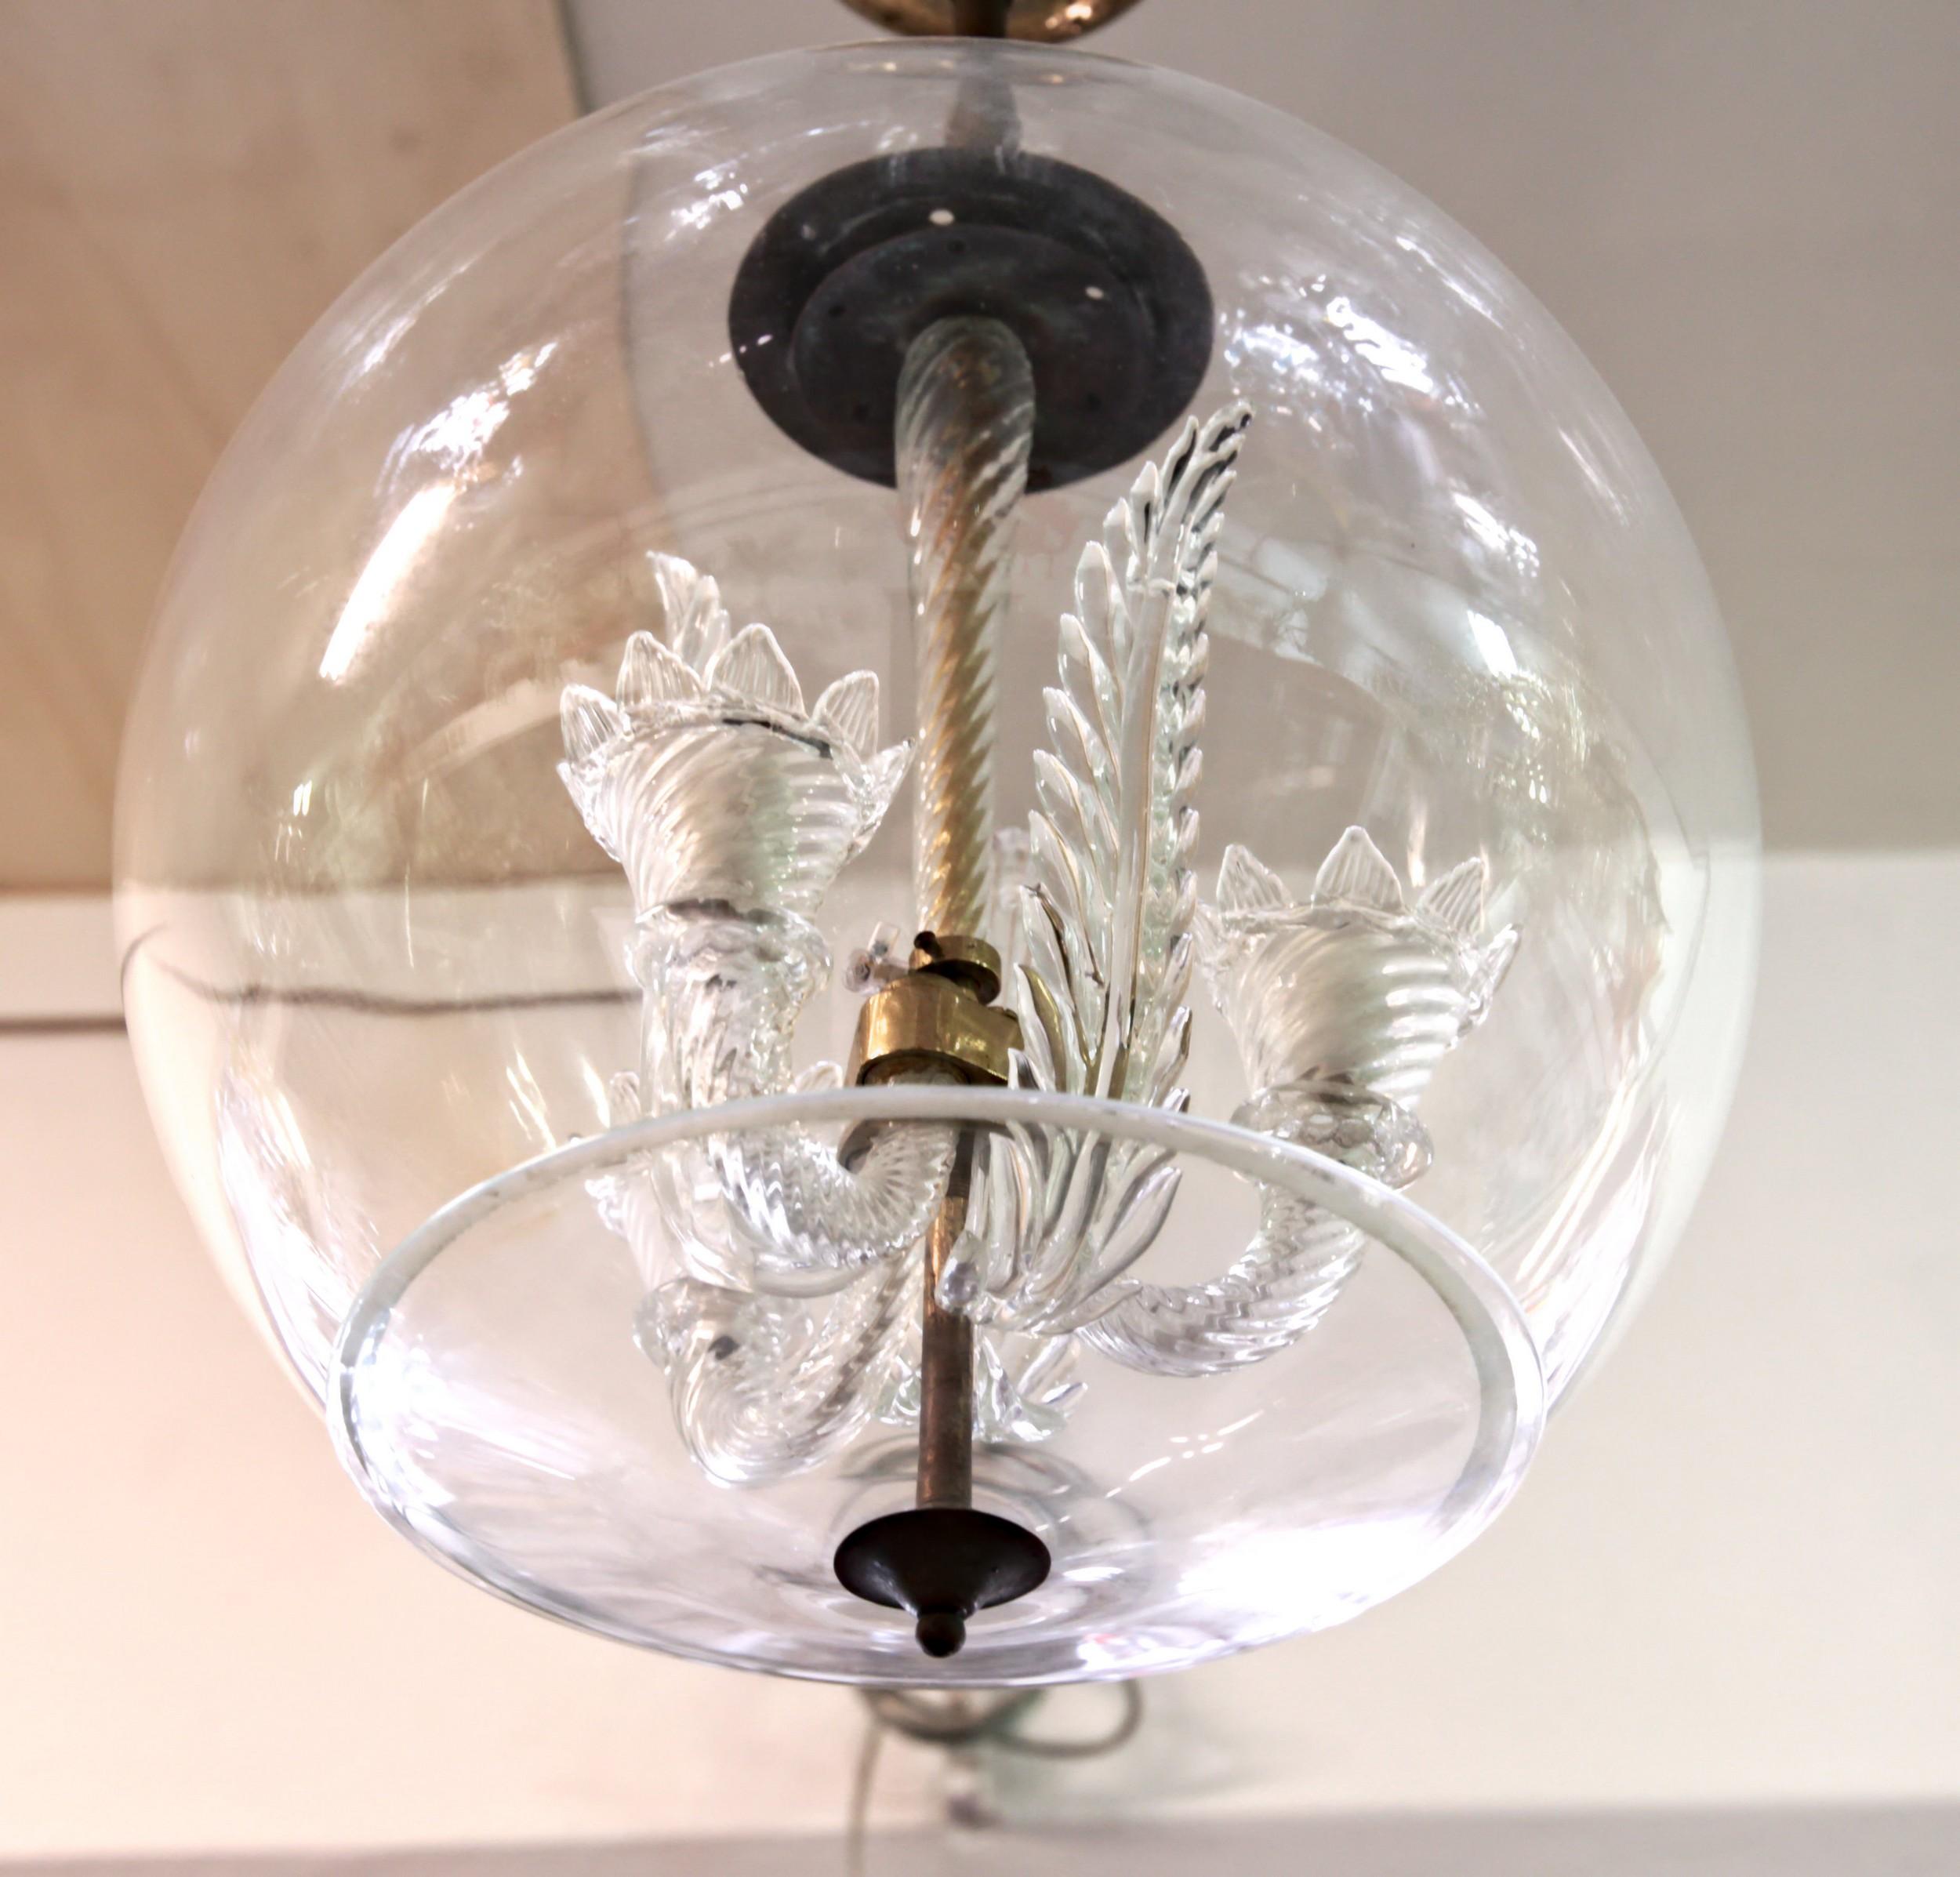 Historical Venini piece created under former director Tommaso Buzzi.
Small glass chandelier with 3 leaves and brass hardware encased in a glass sphere with a lower lid.

Collector's museum piece. 

Venini blue catalog figure 138,

Reference
Venini.